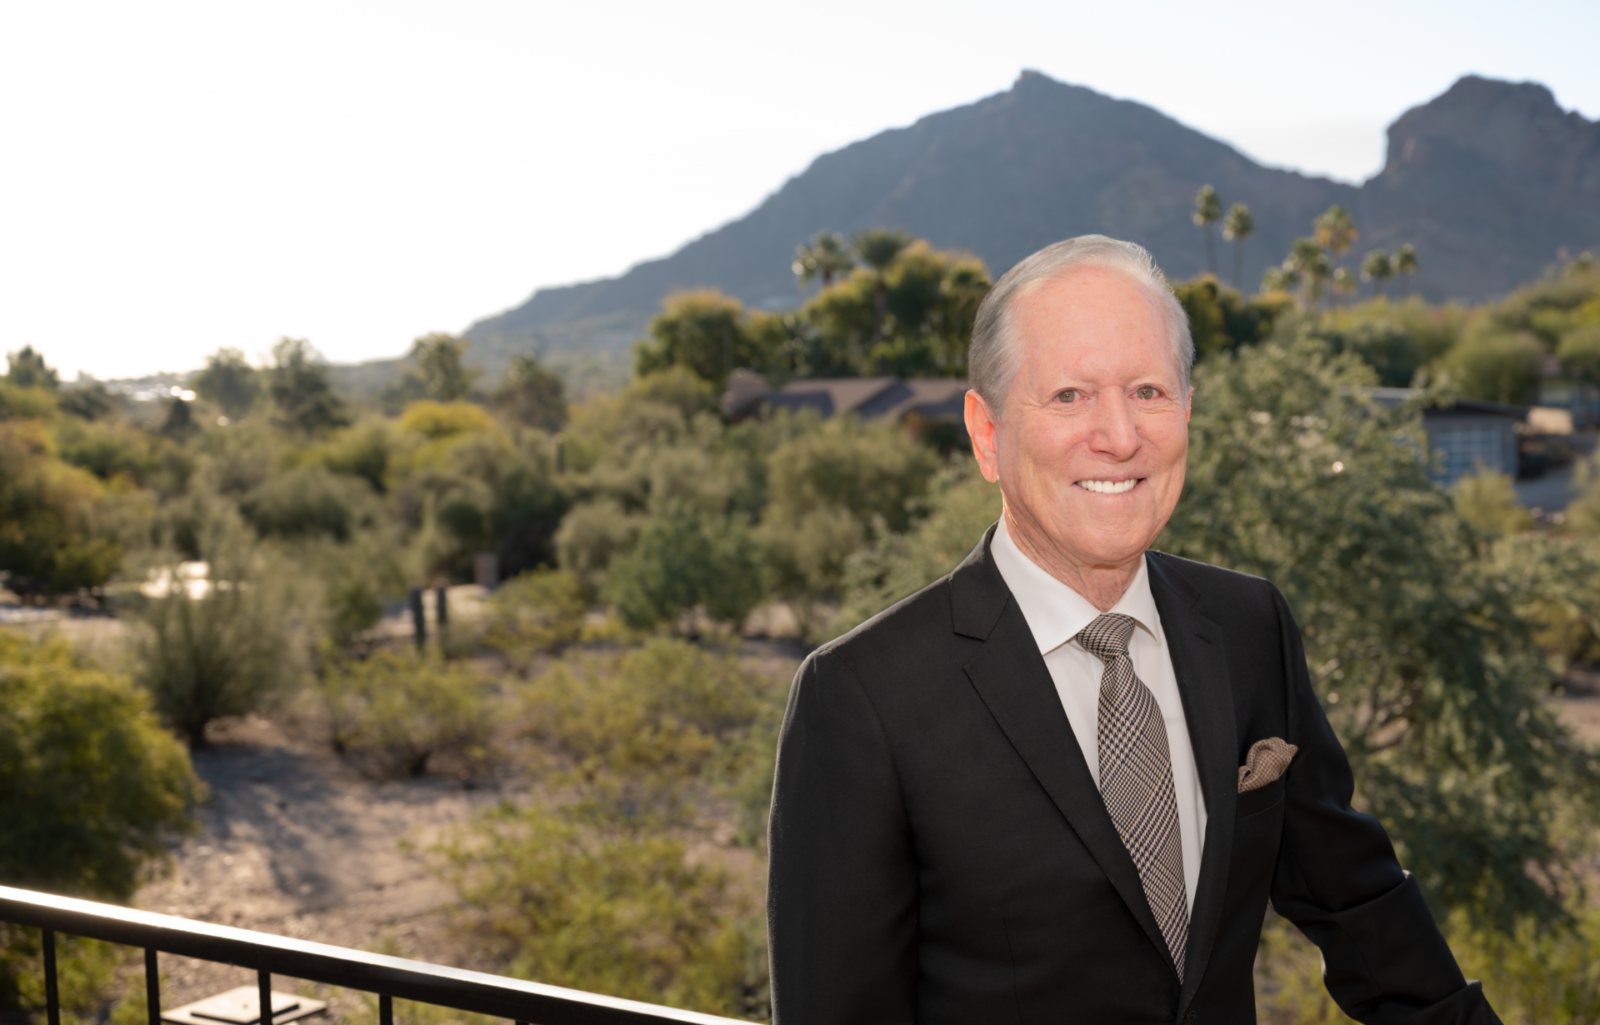 After moving to Phoenix in 1973, Larry Lazarus carved out a career as a land use attorney that has left an unmistakable mark on the Valley.